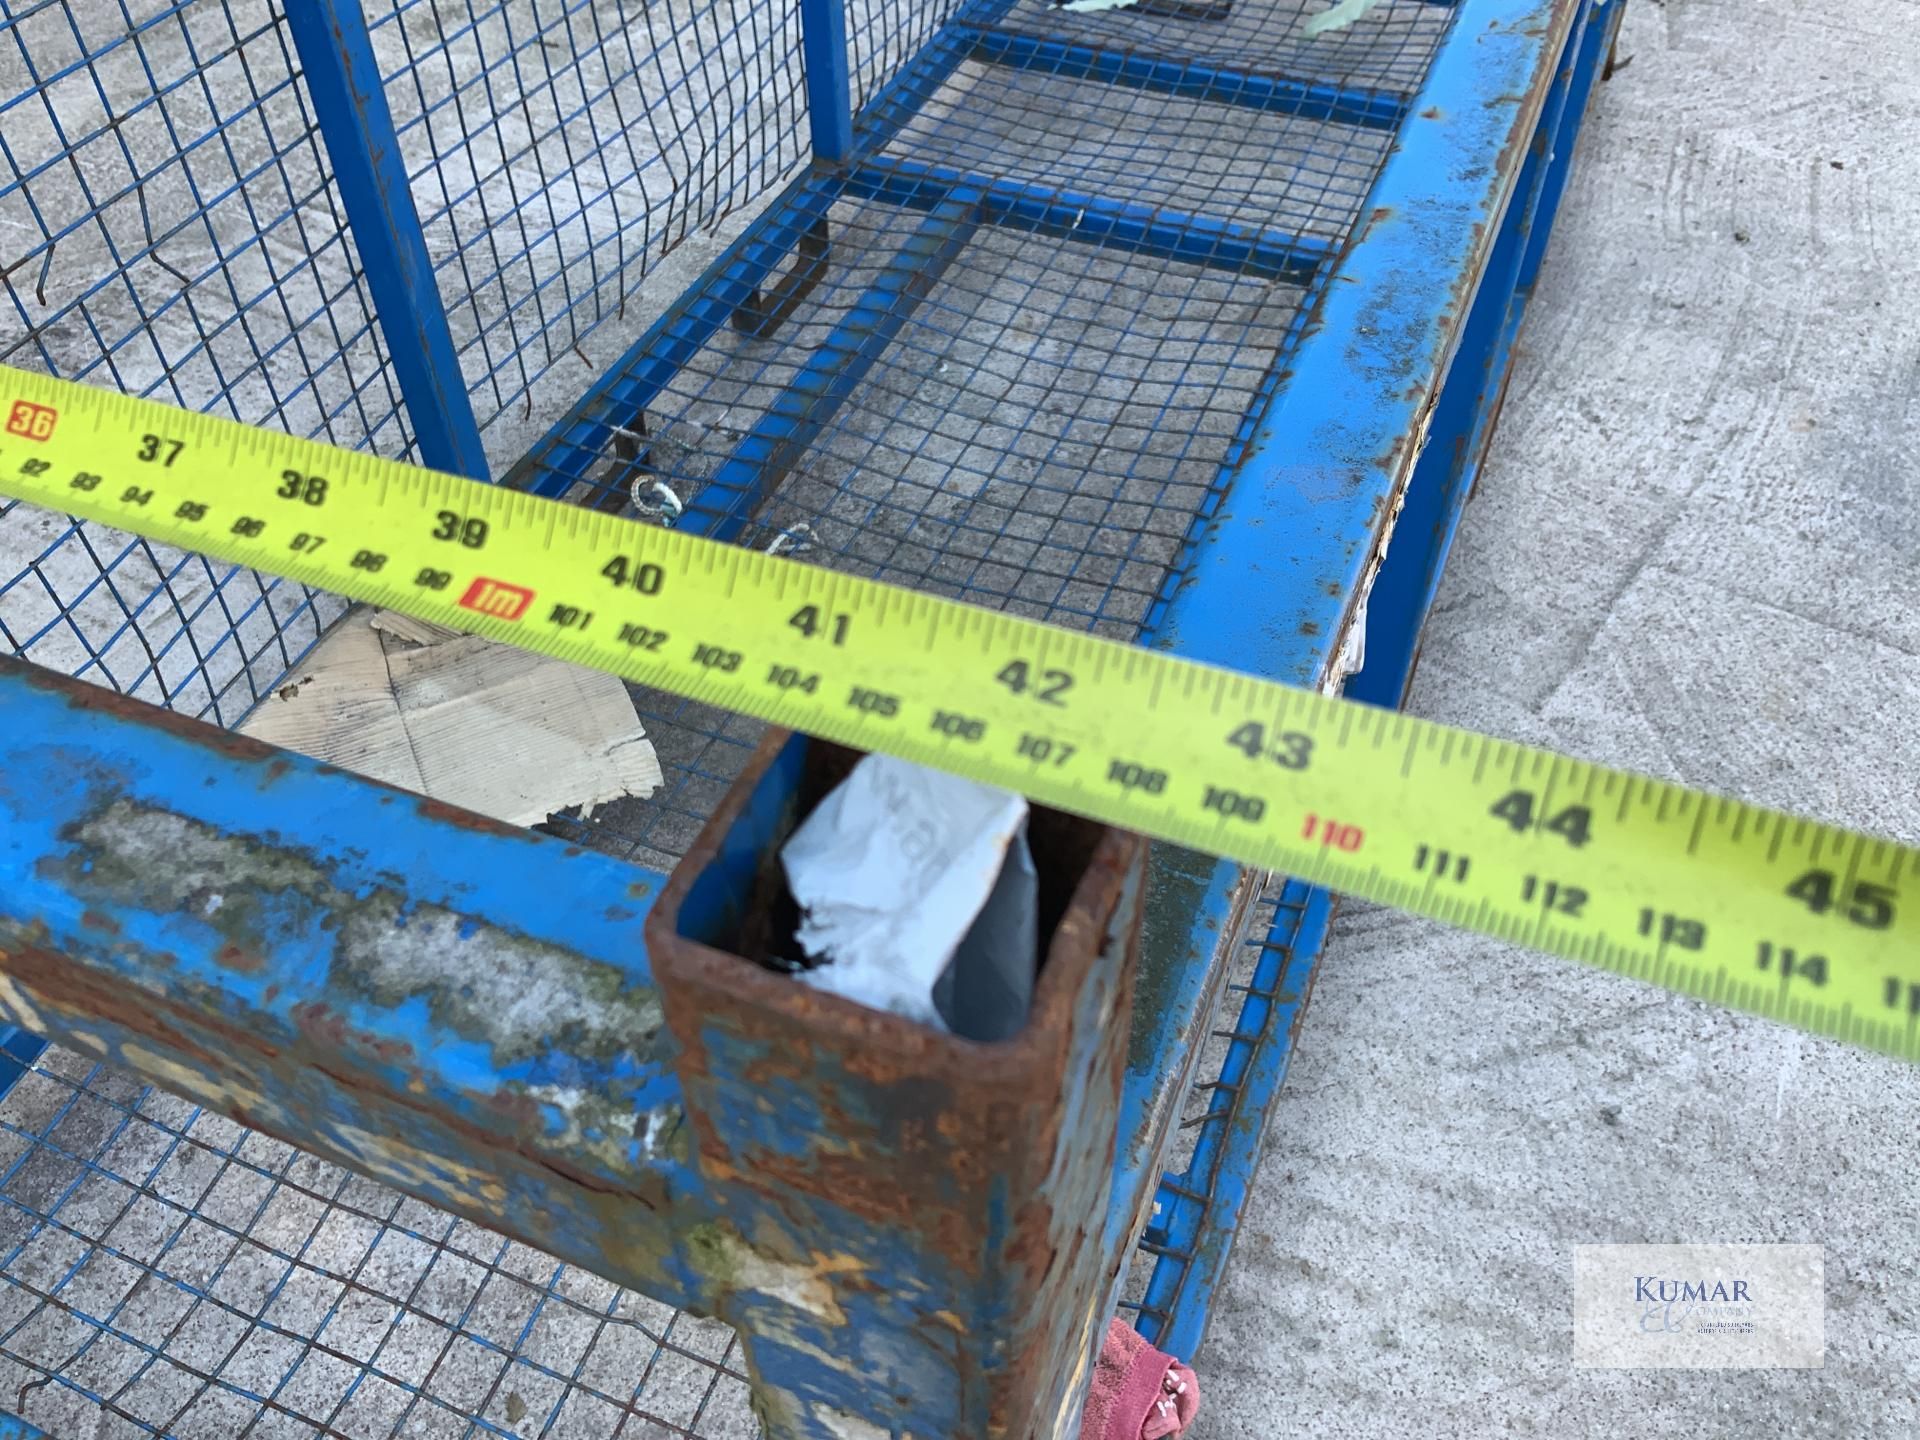 Metal Stillage Suitable for Fork Truck Use - L - 3m x w - 1.1m - Image 7 of 8